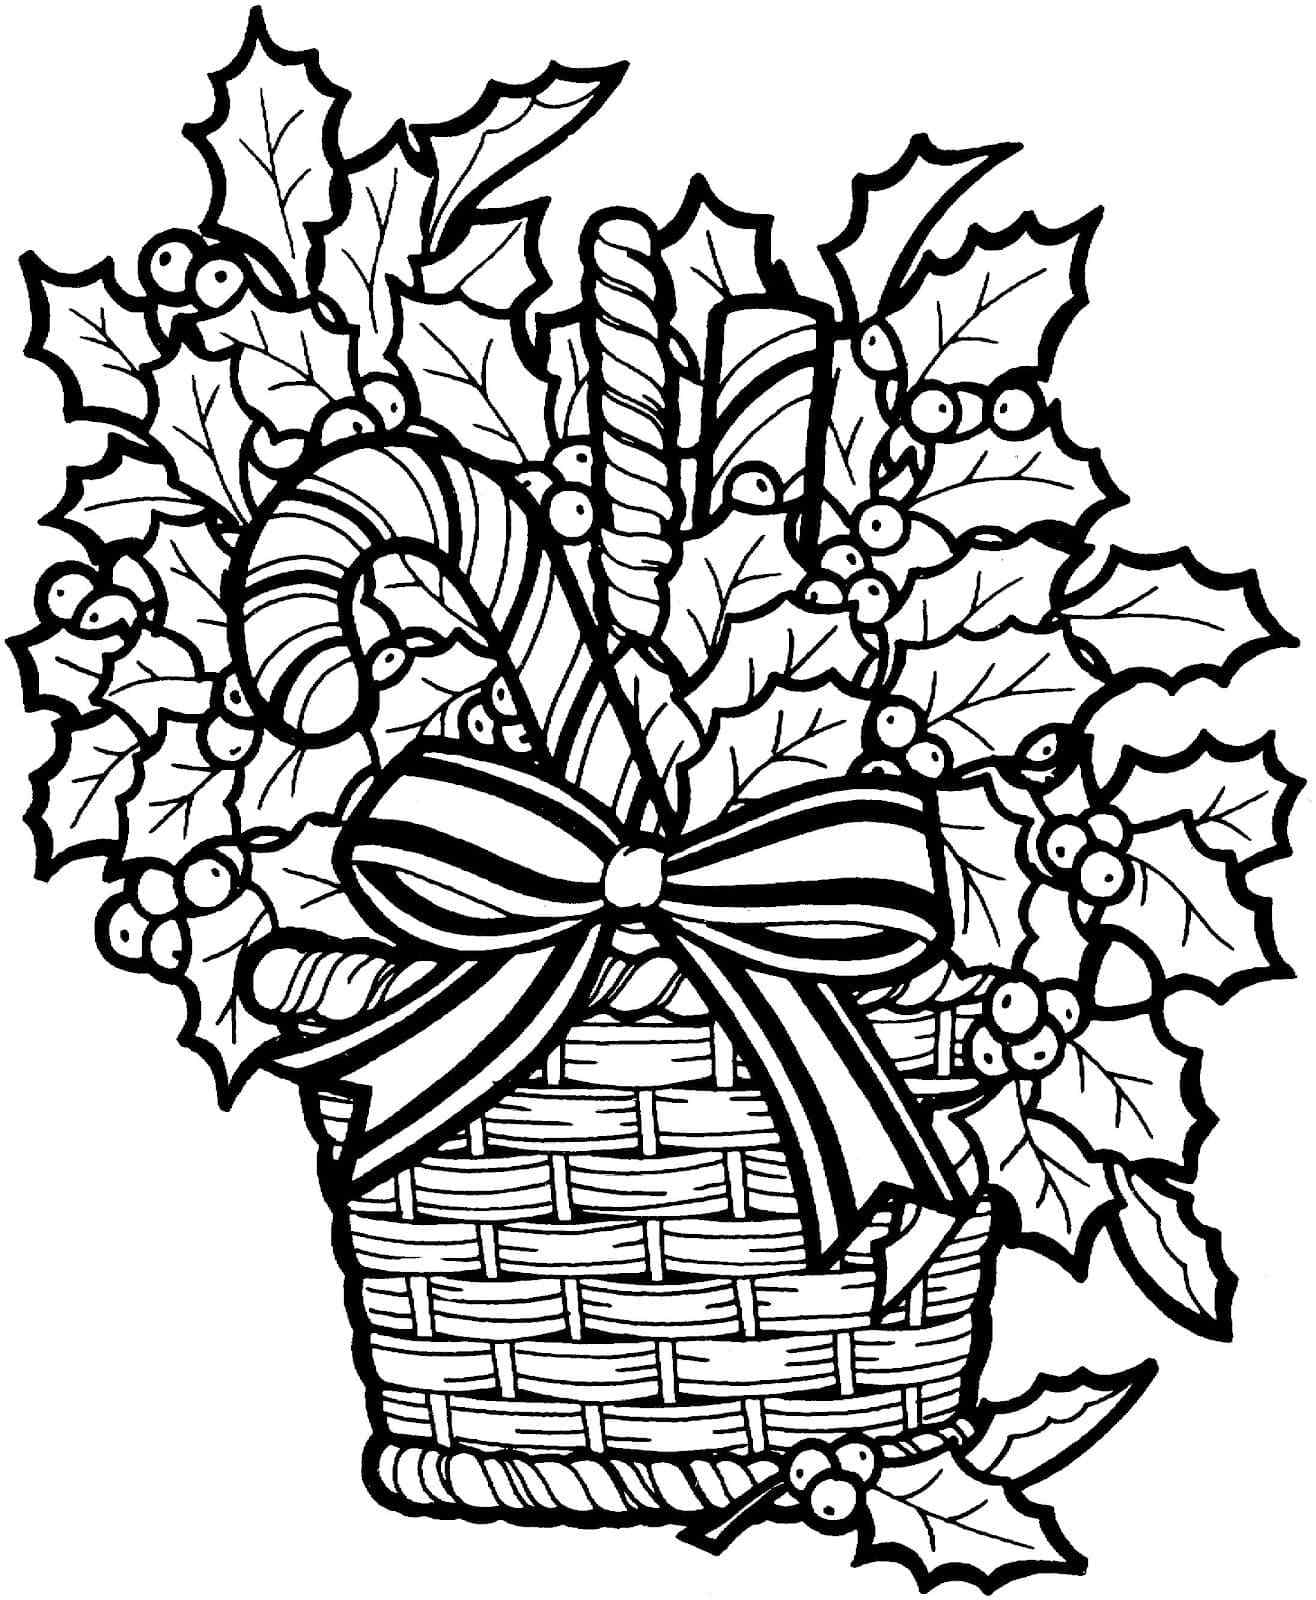 Leaves And Candy Cane Coloring Page